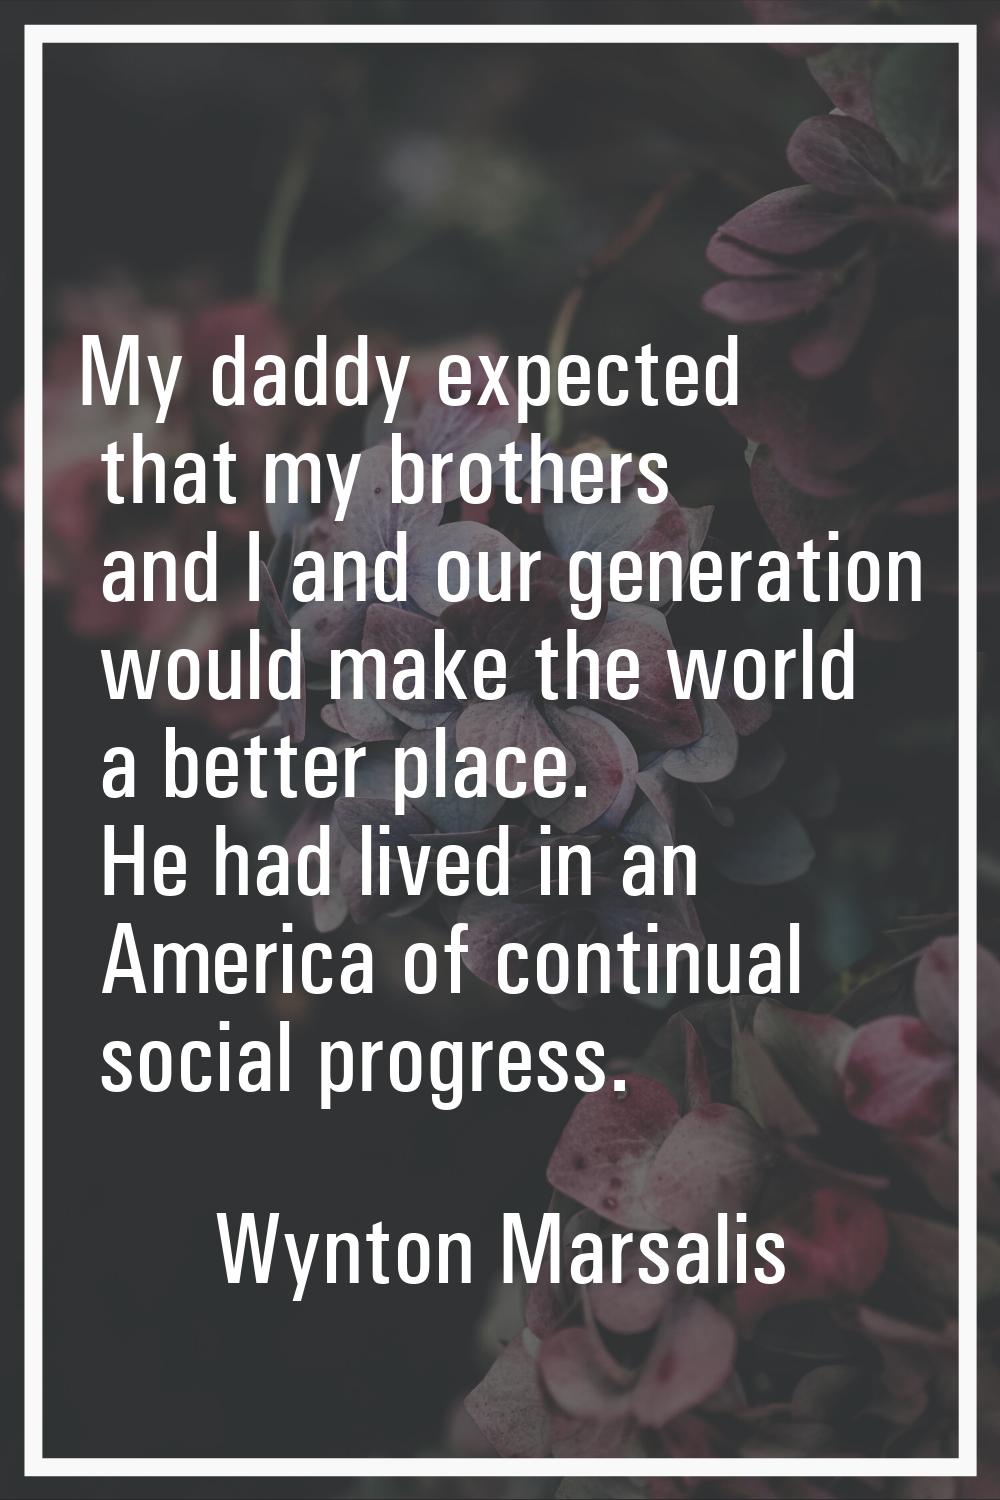 My daddy expected that my brothers and I and our generation would make the world a better place. He